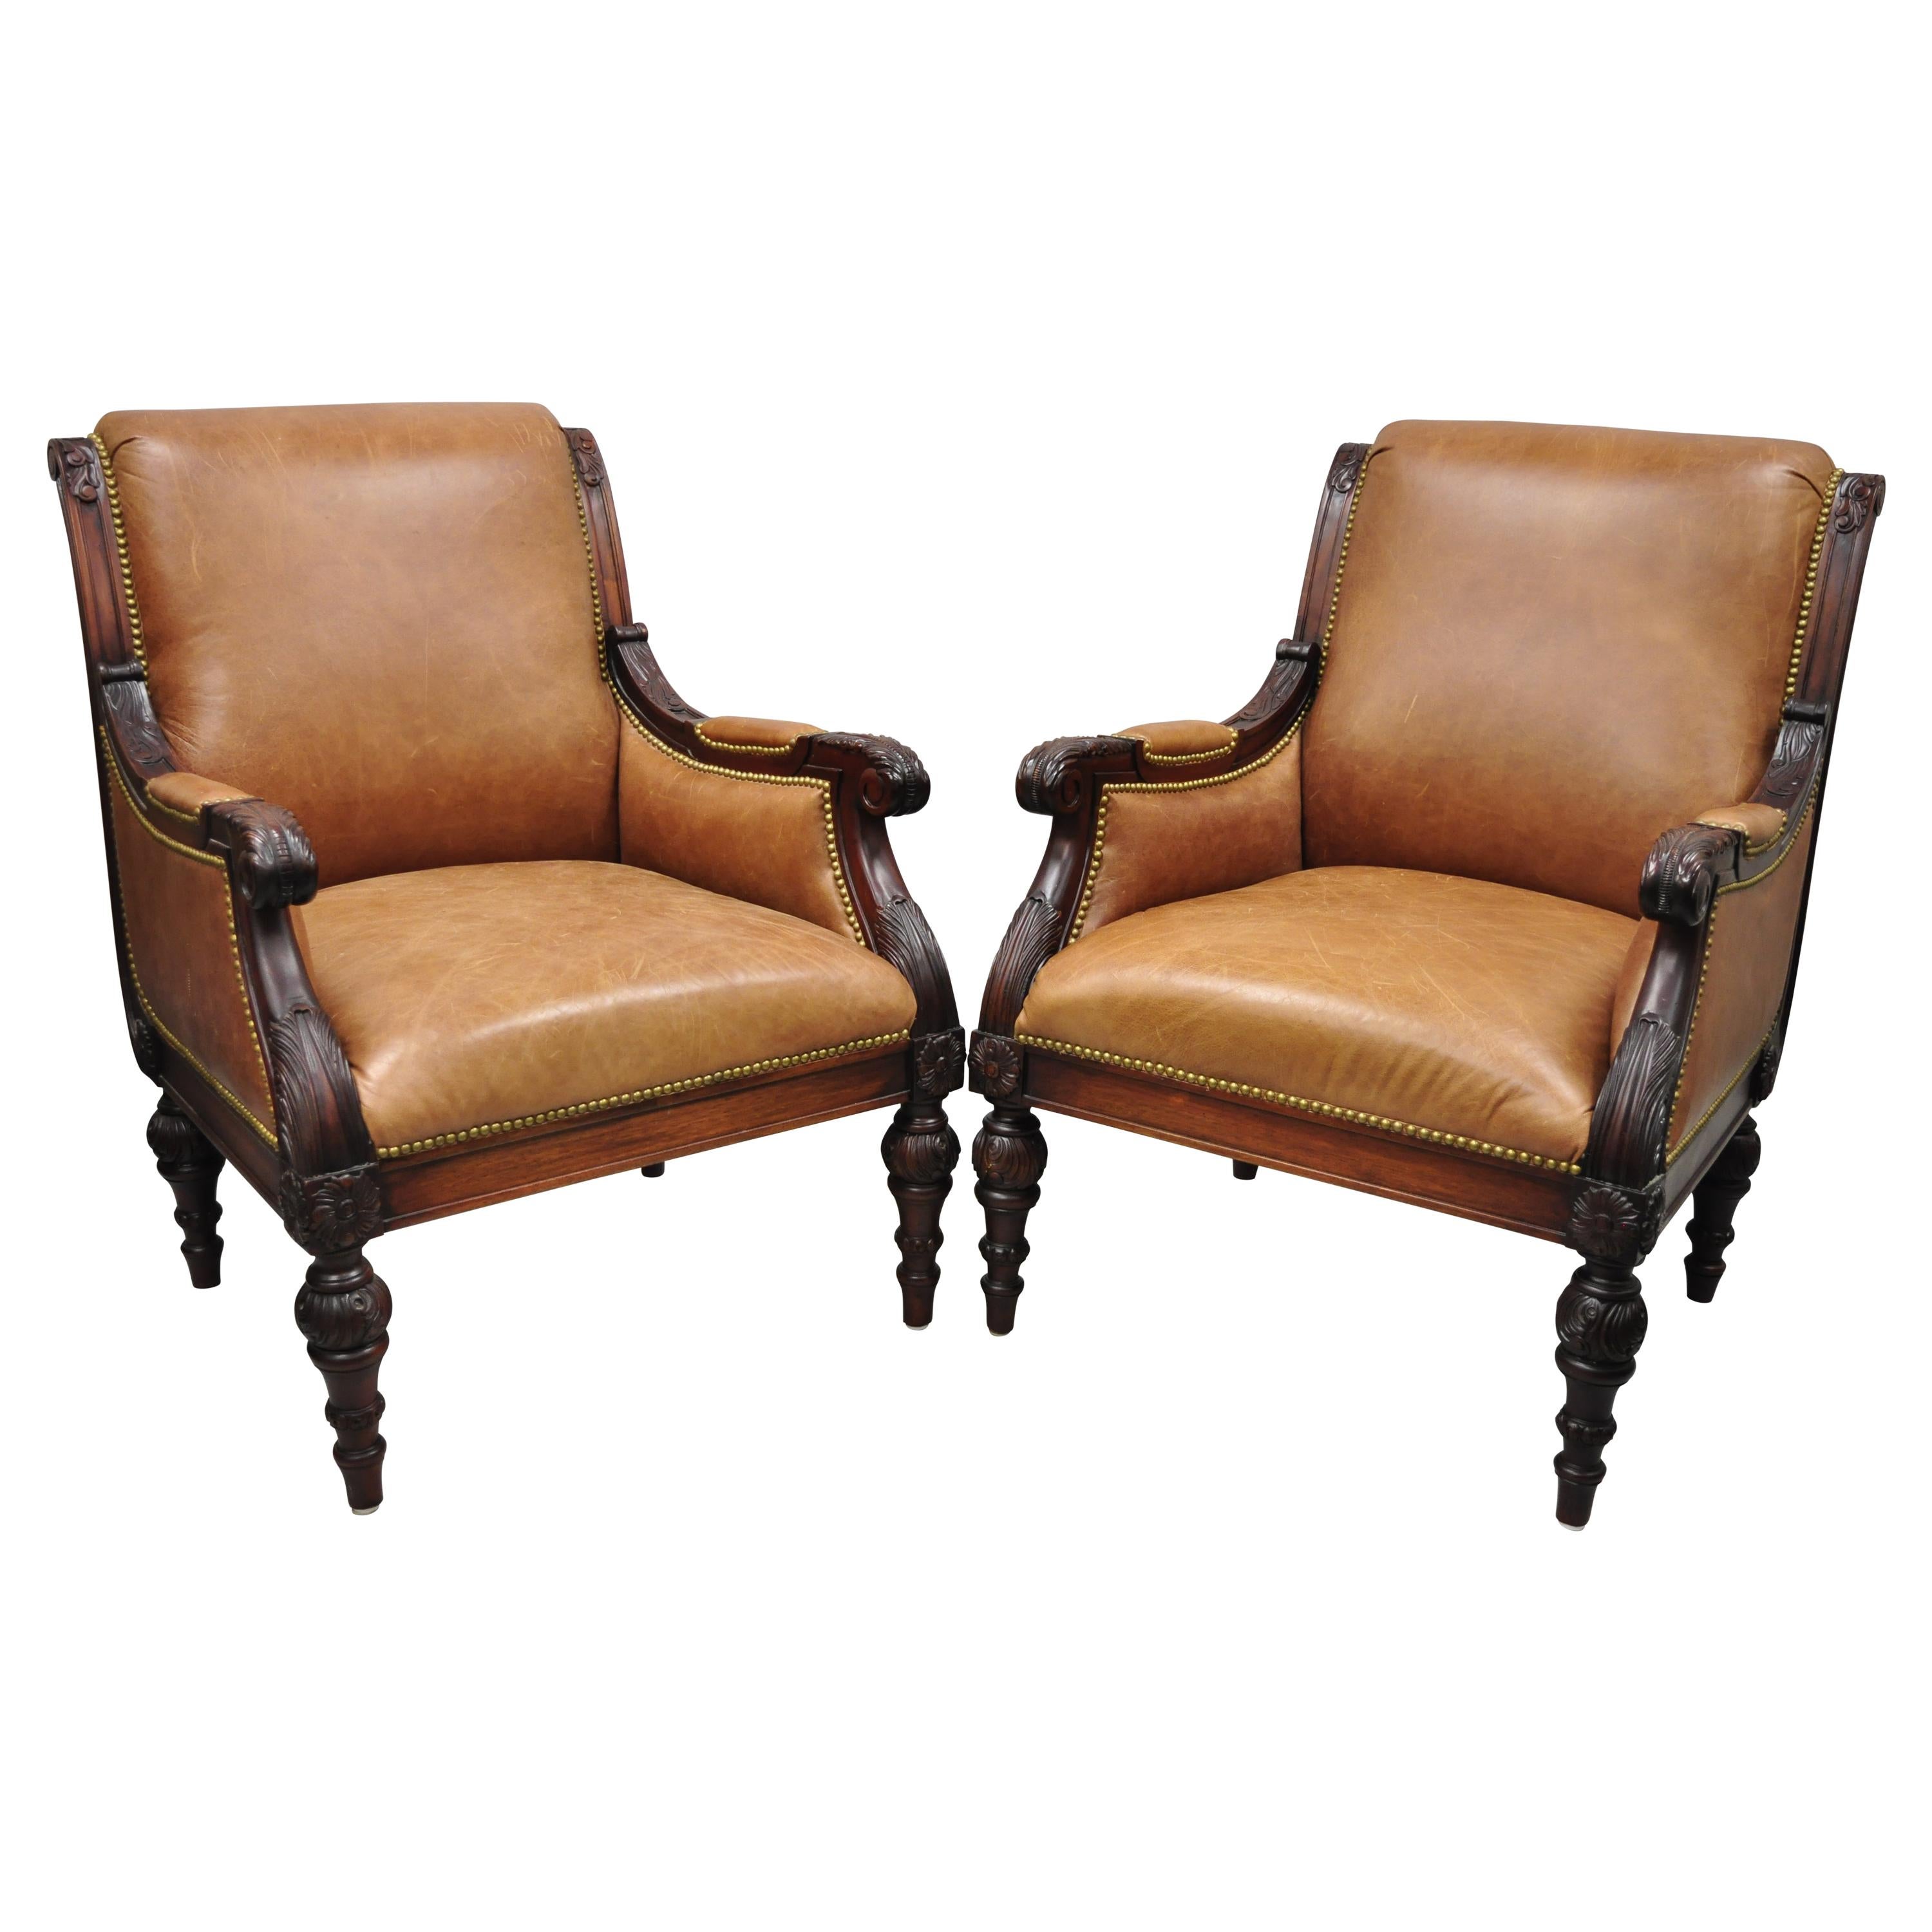 Sam Moore Brown Saddle Leather Carved Wood Regency Lounge Arm Chairs, a Pair